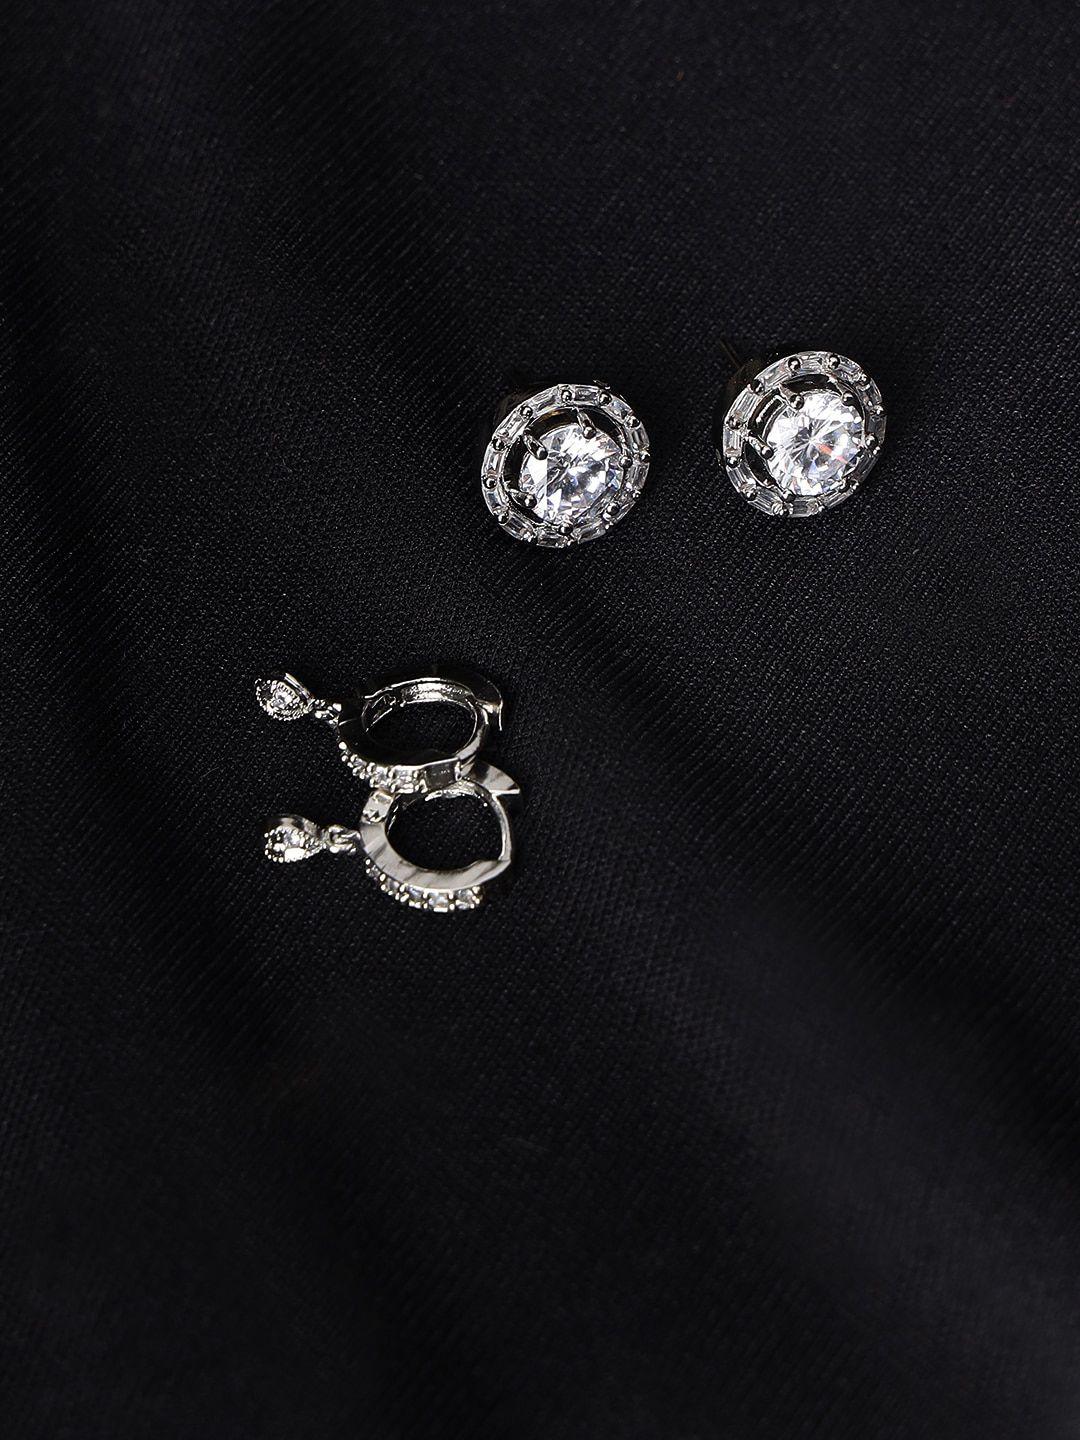 dressberry set of 2 silver-plated circular studs earrings